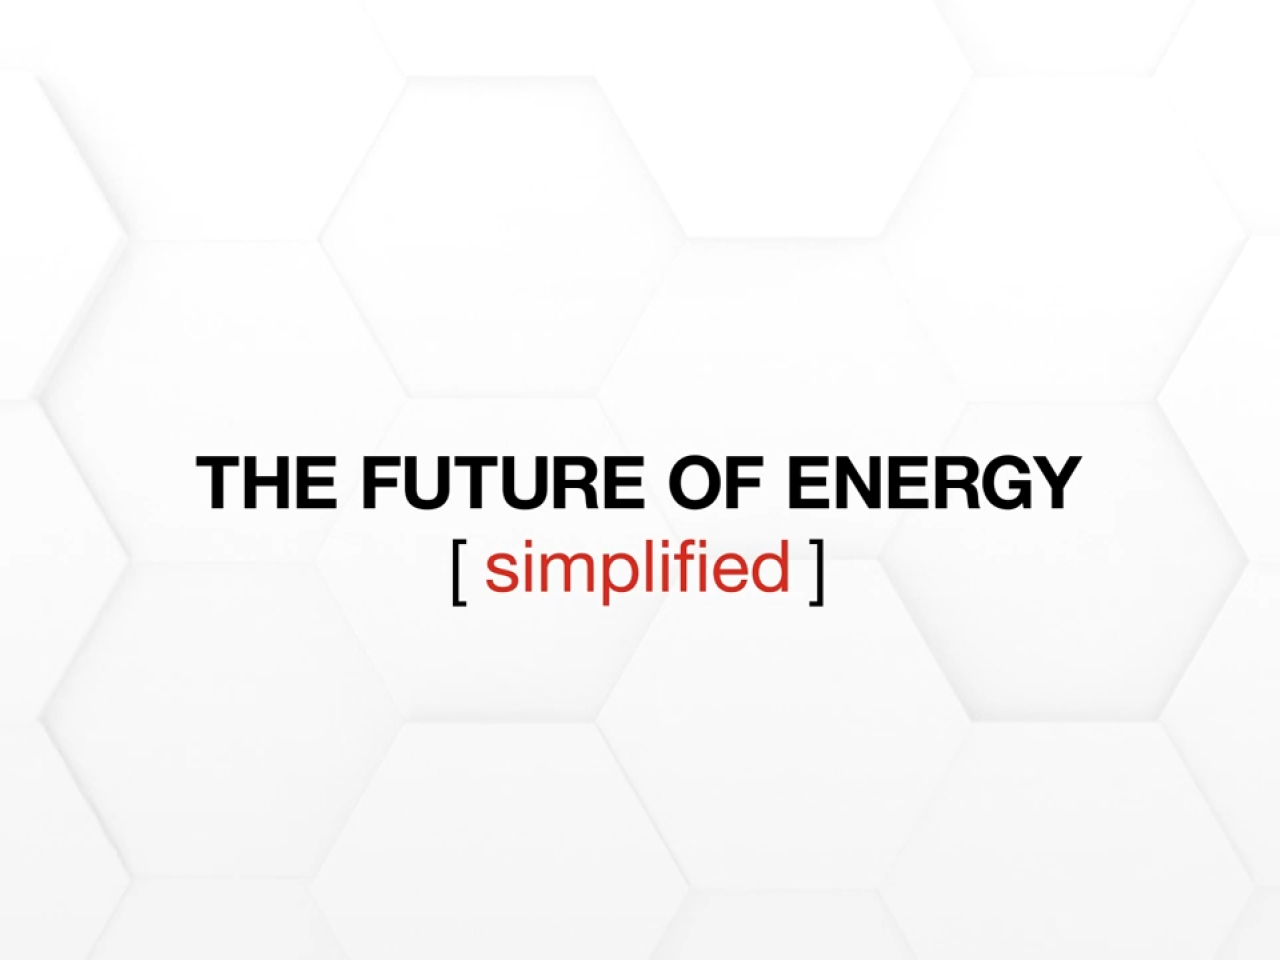 "THE FUTURE OF ENERGY [ simplified ]"